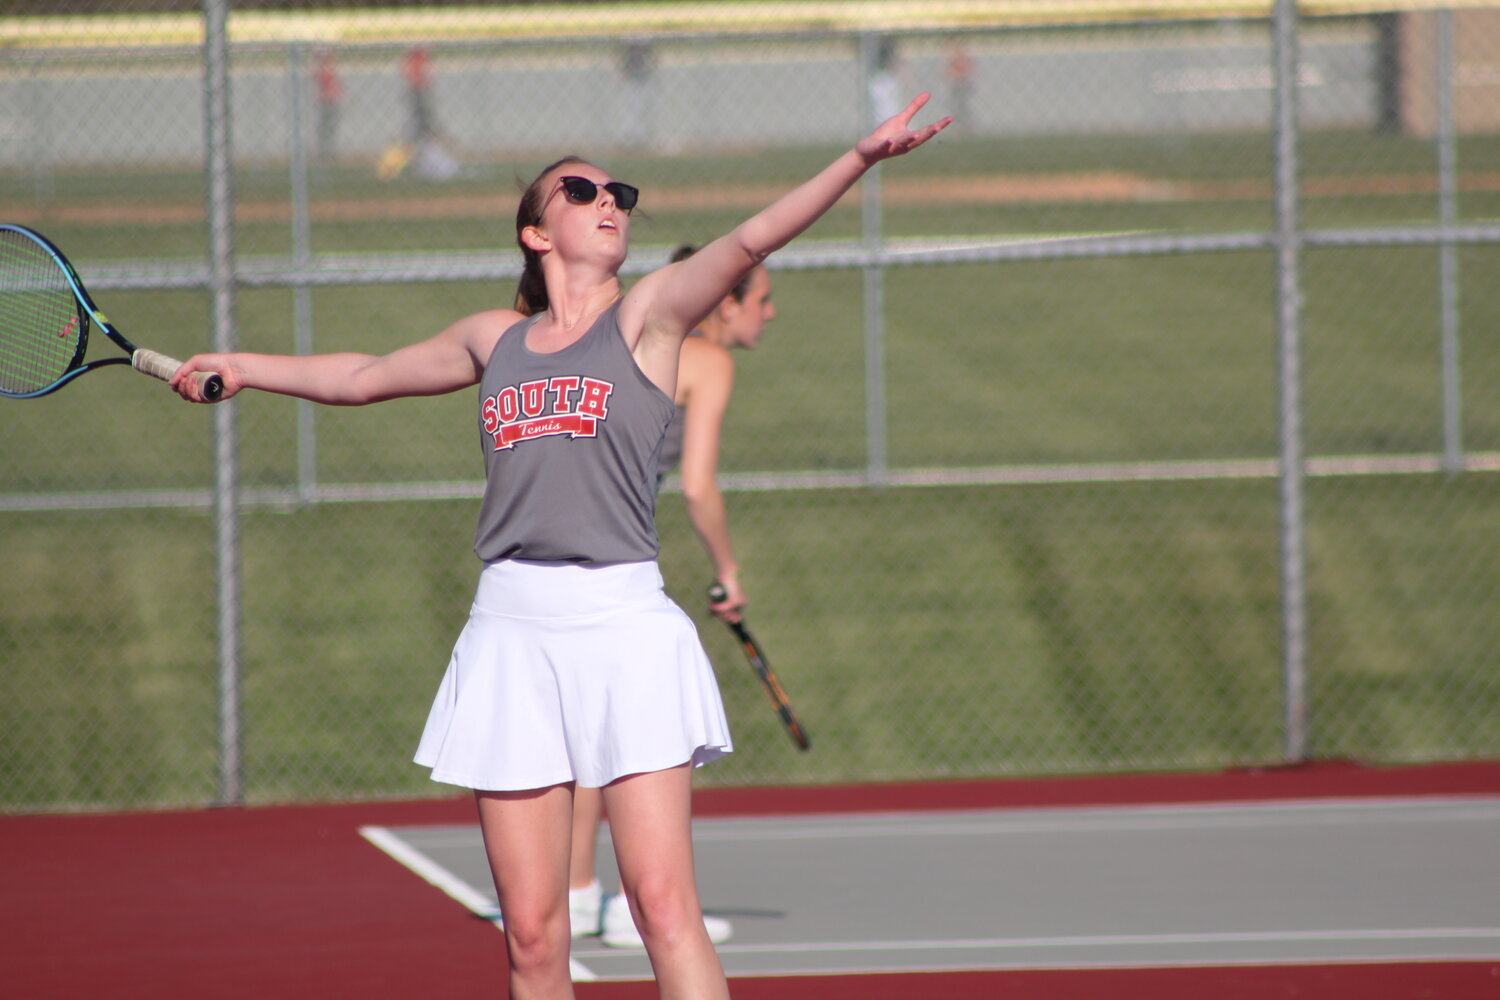 Marley Jones gets ready for a serve during her match at two singles.